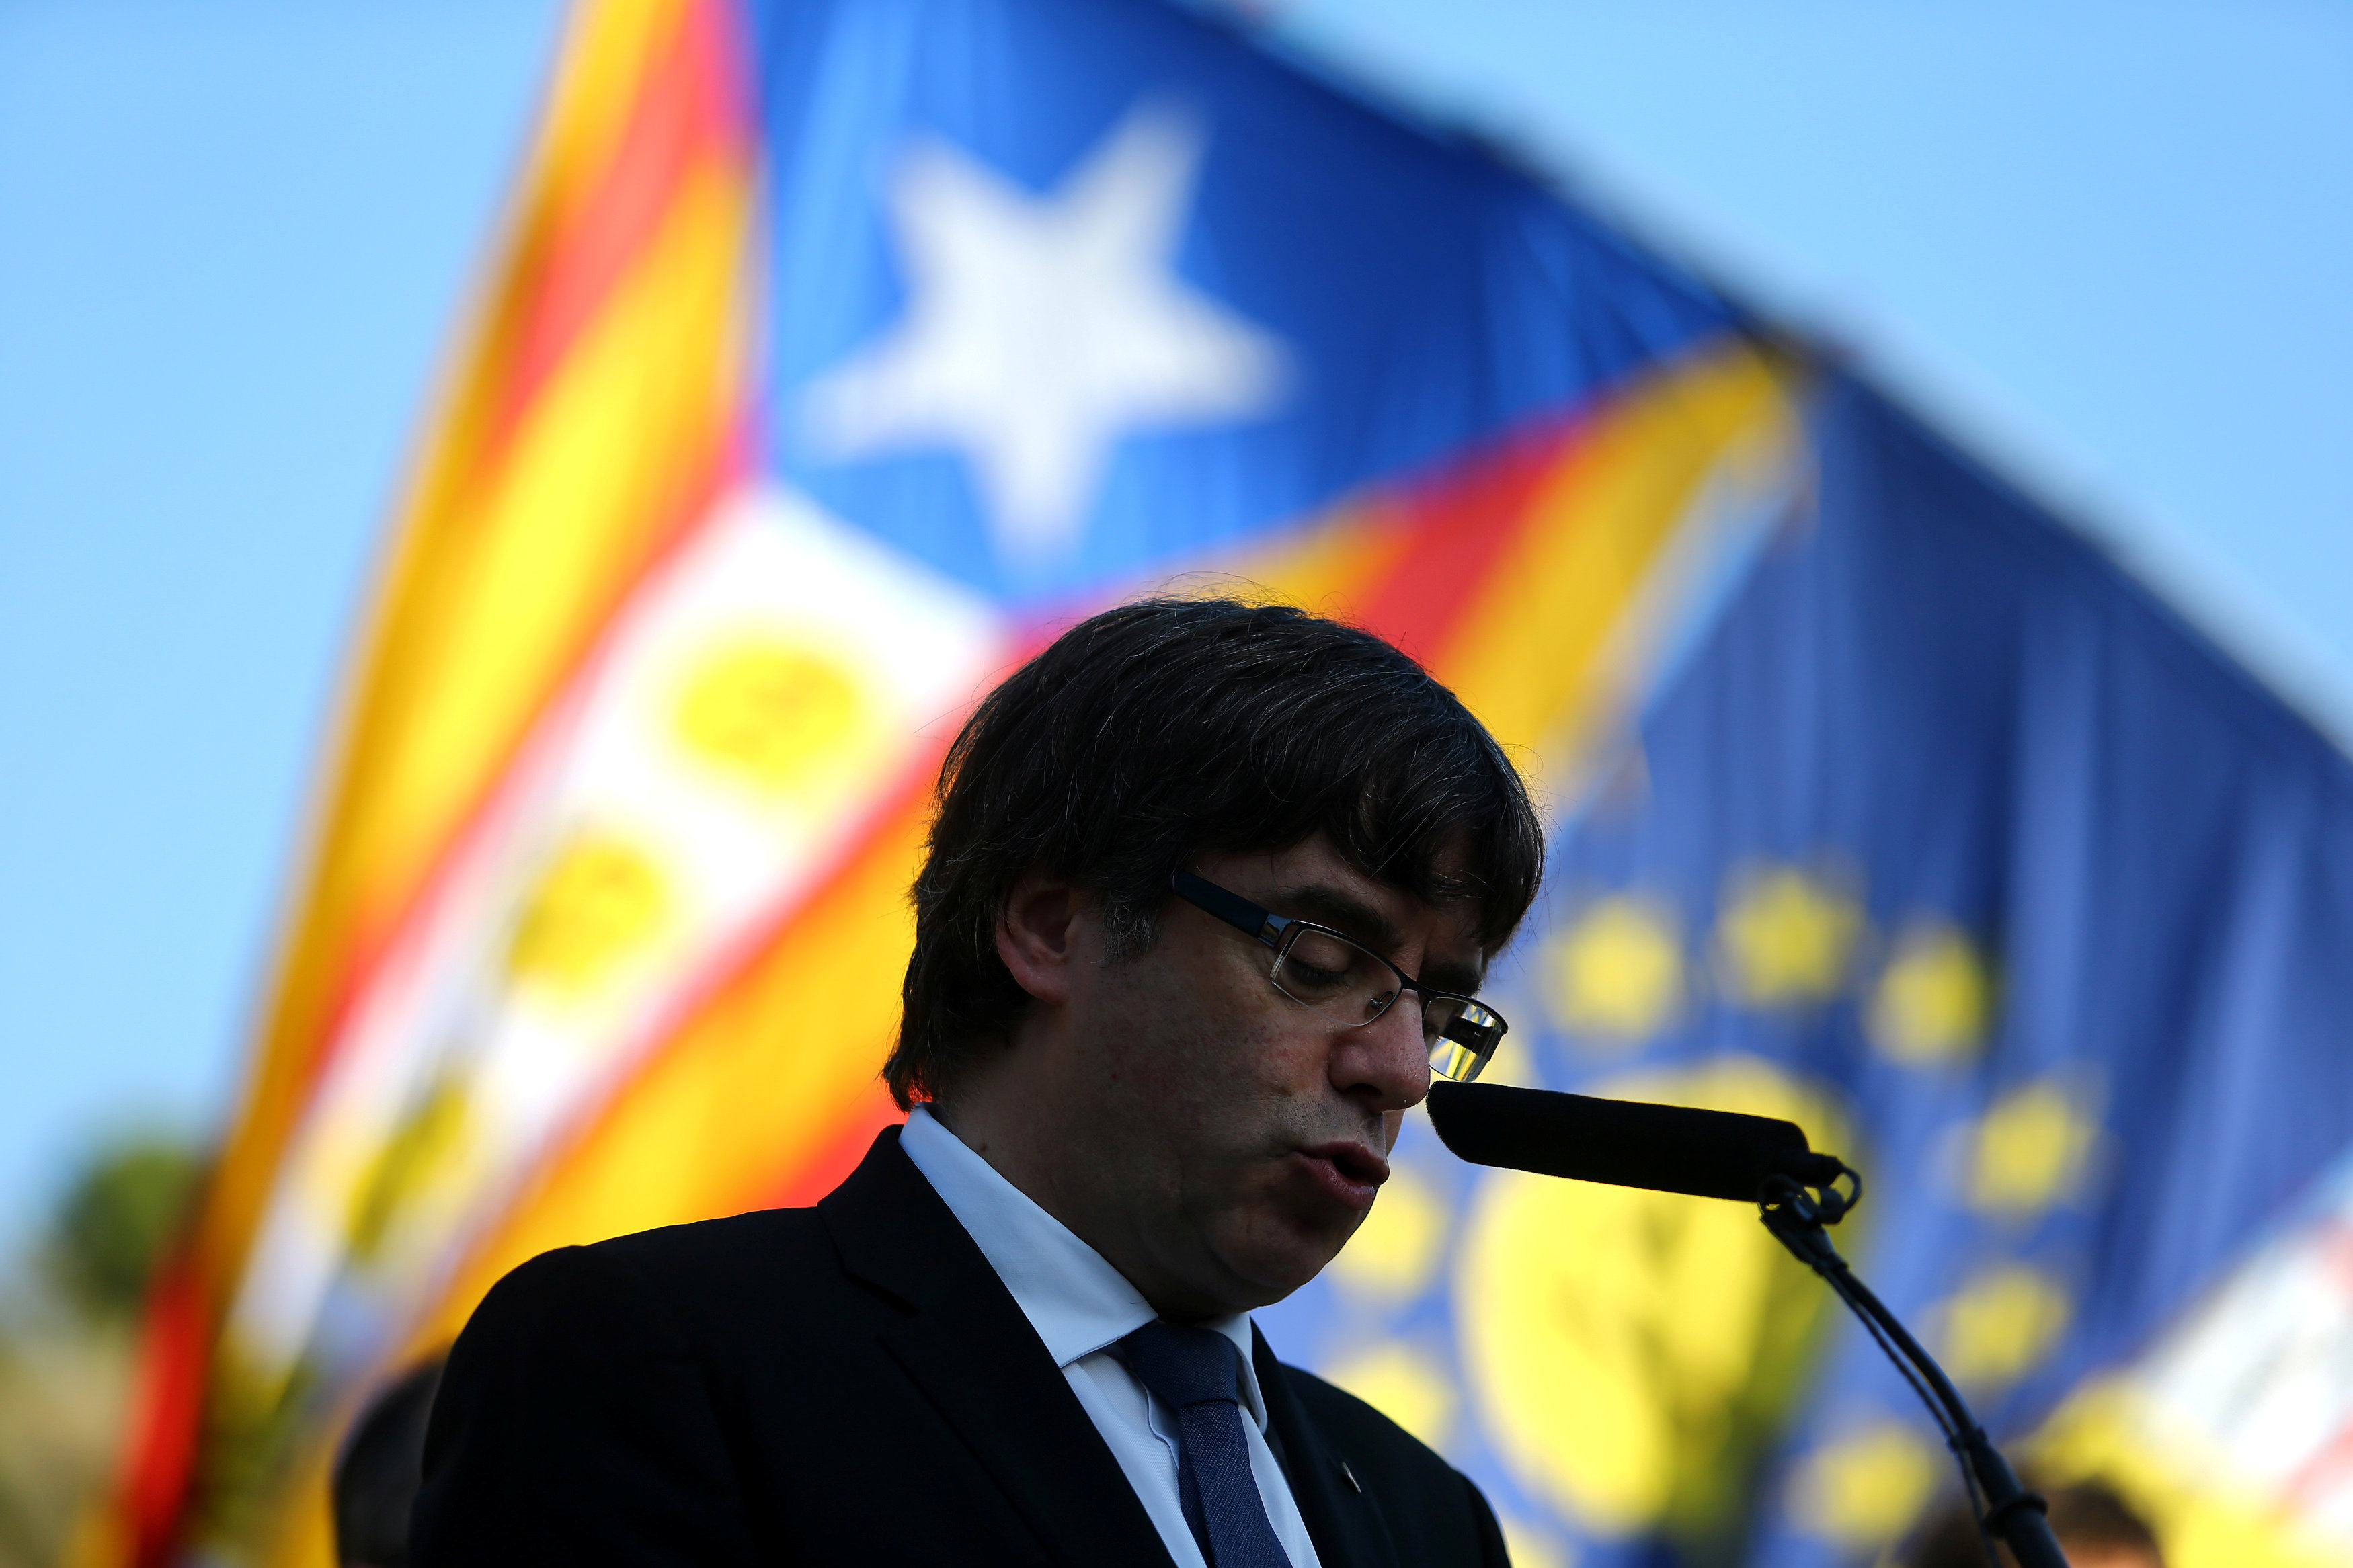 Catalan leader fails to spell out independence stance, calls for talks